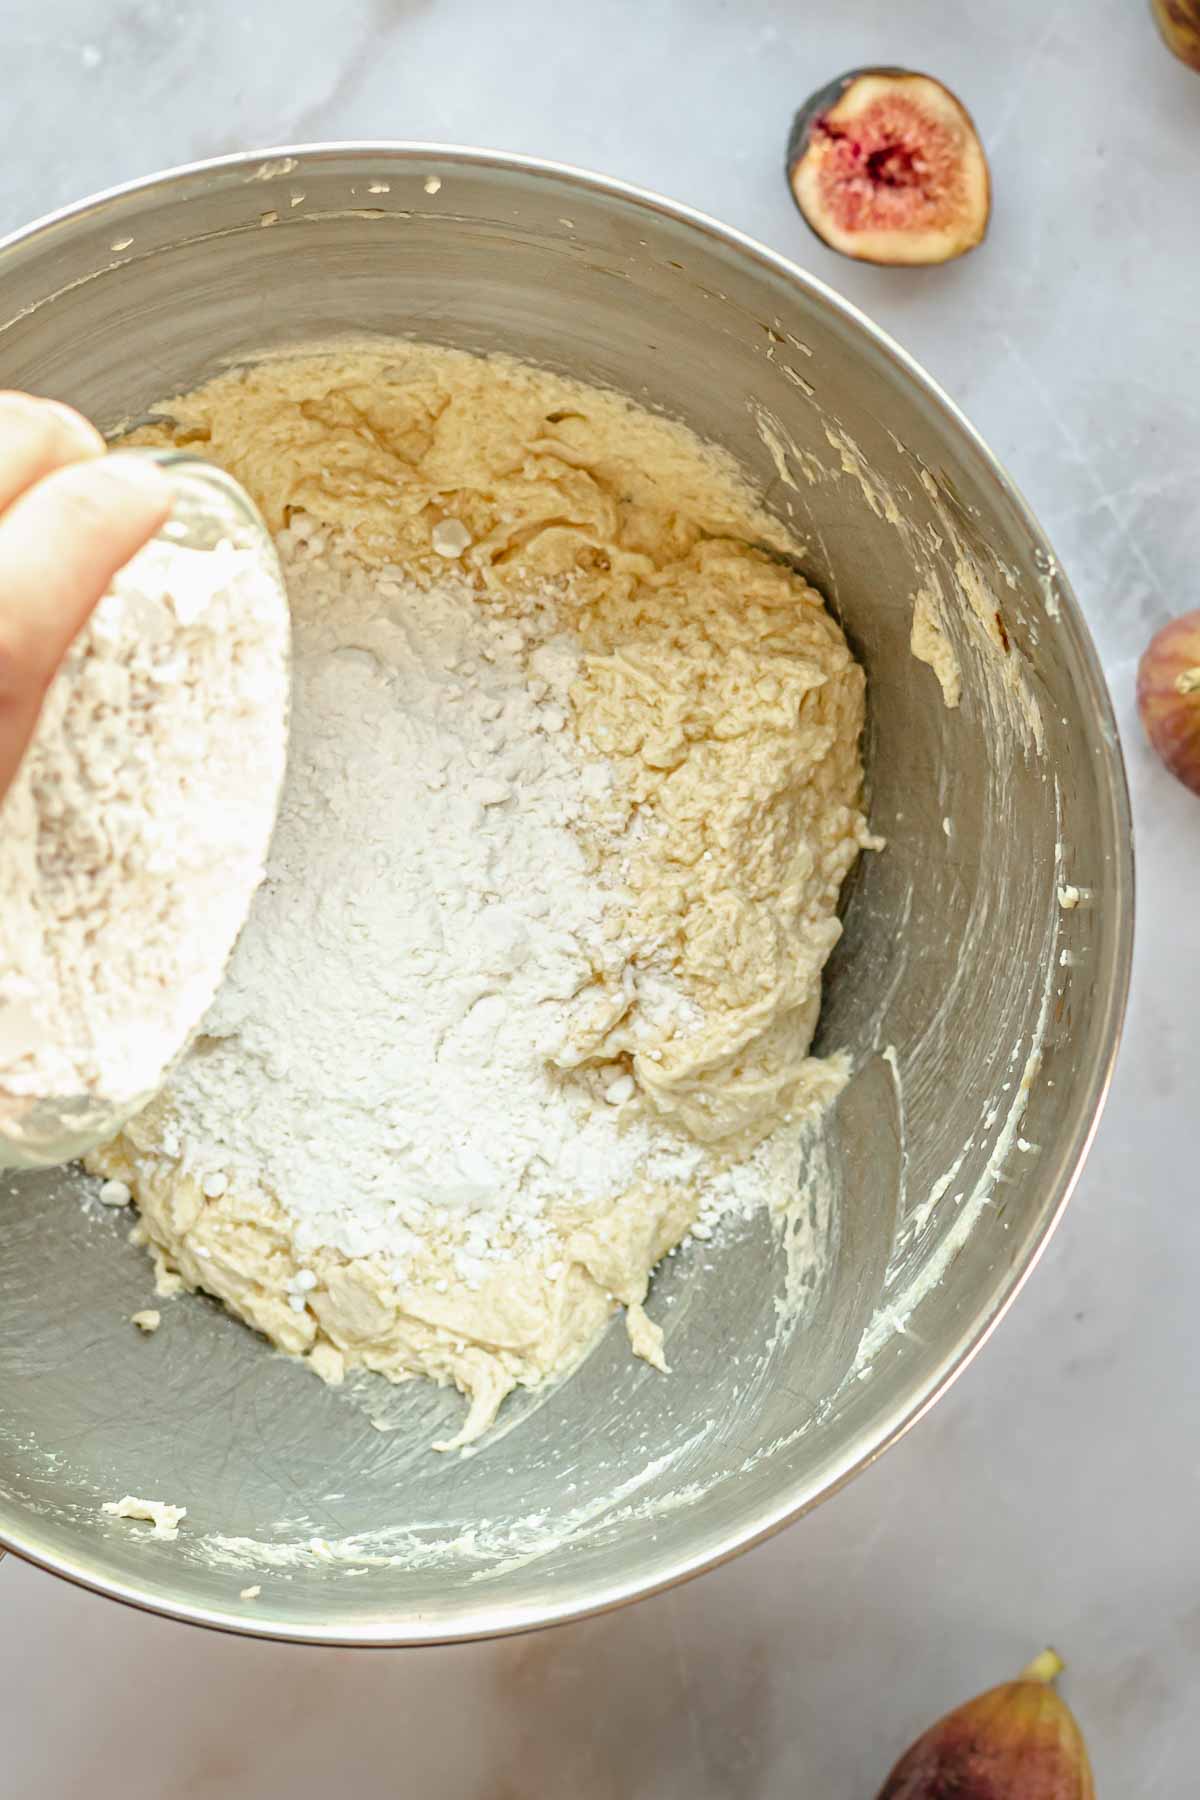 A hand pours flour into creamed butter and sugar.